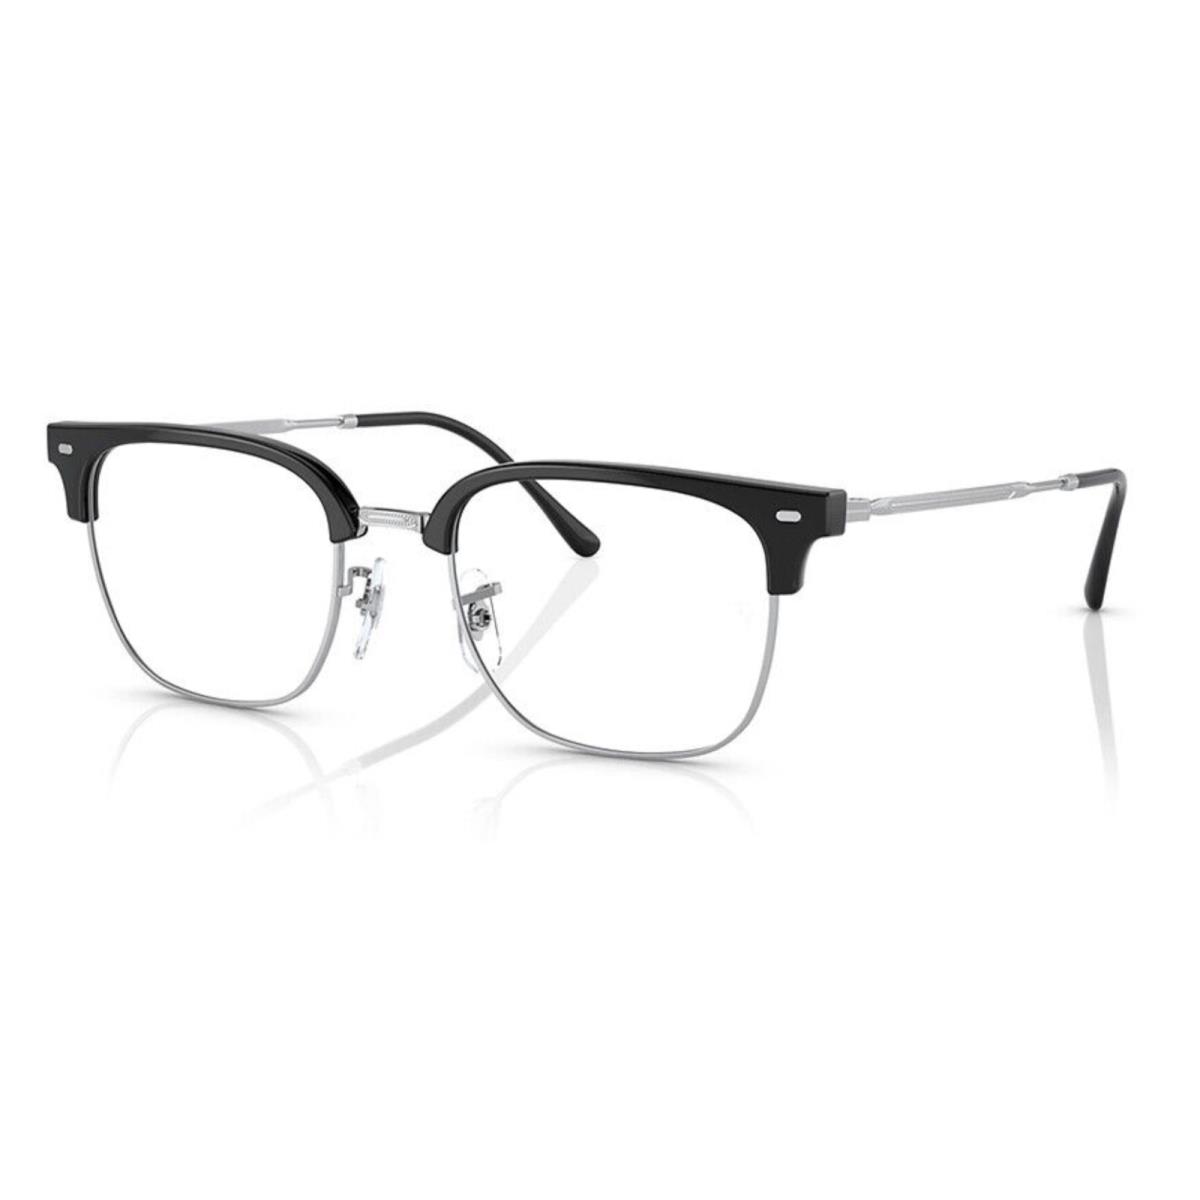 Ray-ban Clubmaster Reading Glasses RB 7216 2000 Black Silver Frames Readers - Black & Silver, Frame: Black, Lens: